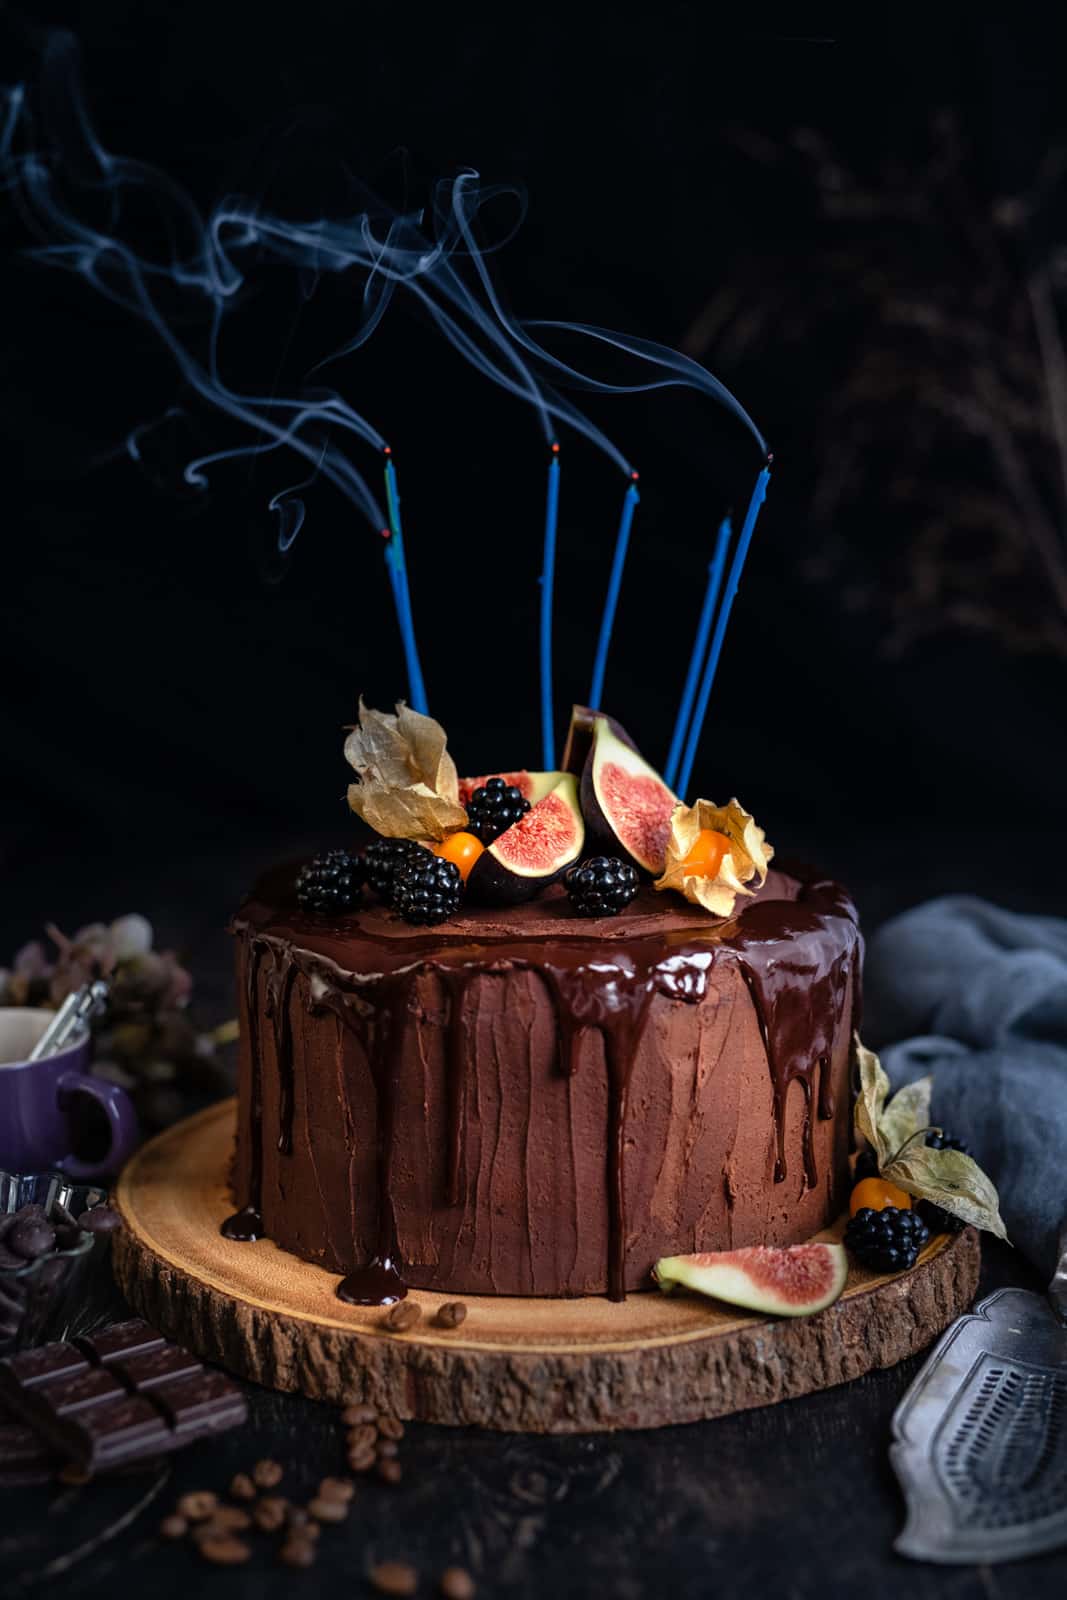 Moist chocolate cake, decorated with chocolate ganache drip and fruit with birthday candles blown out